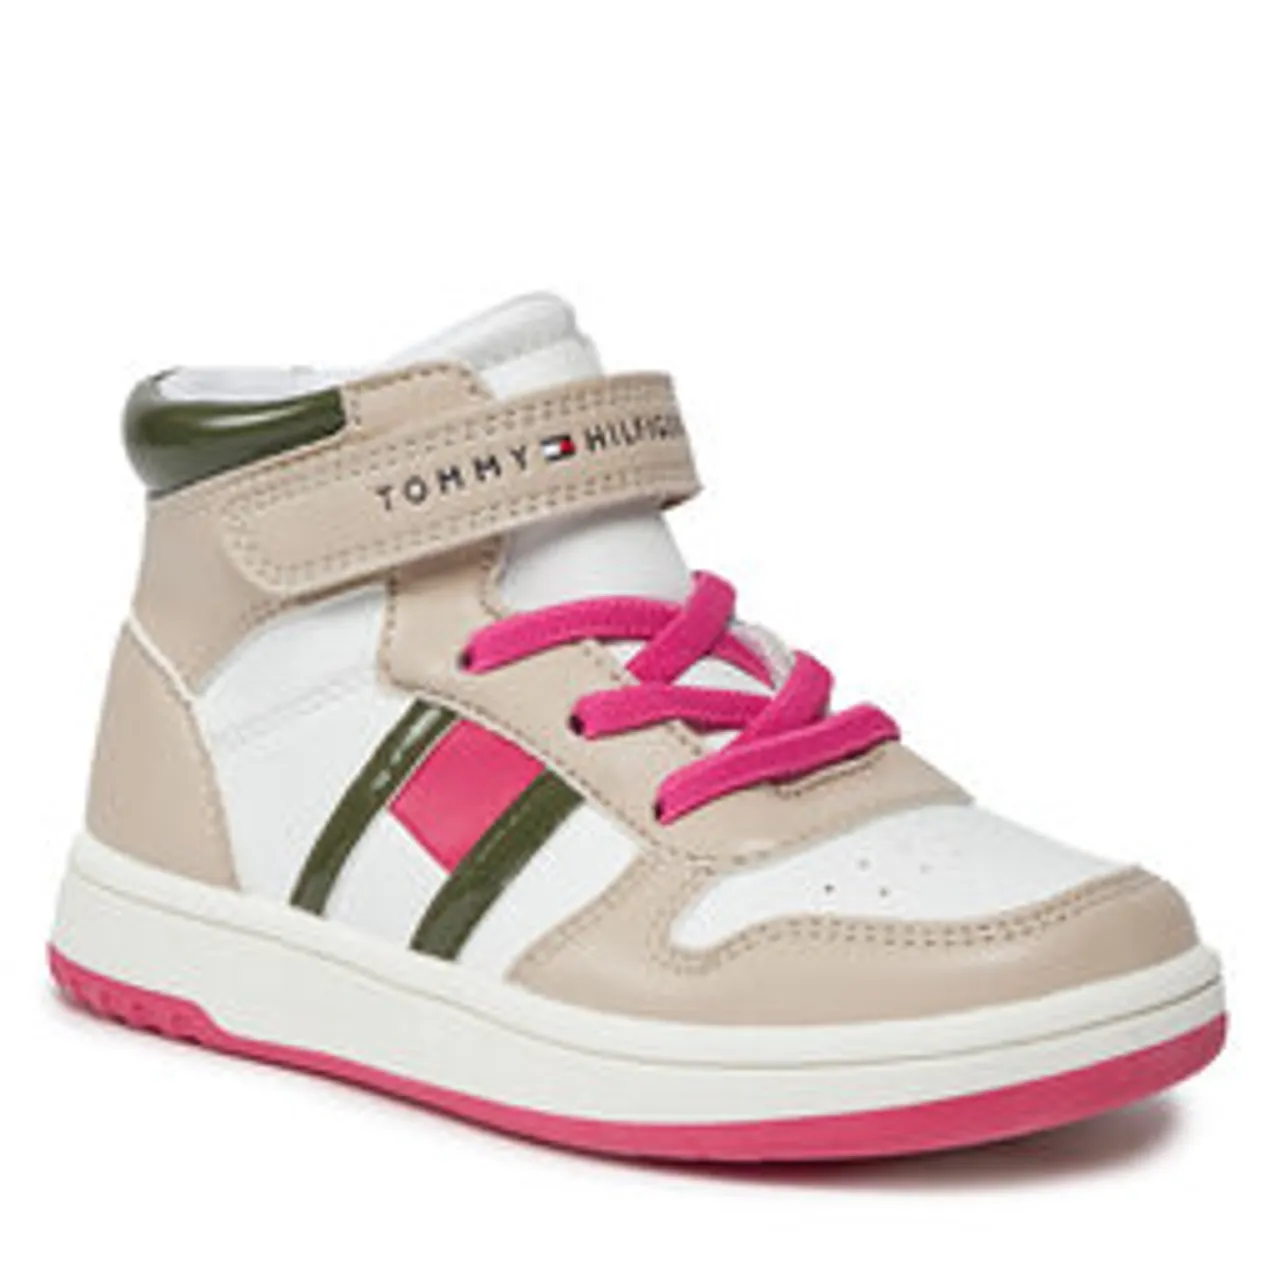 Sneakers Tommy Hilfiger T3A9-32961-1434Y609 S Beige/Off White/Army Green Y609